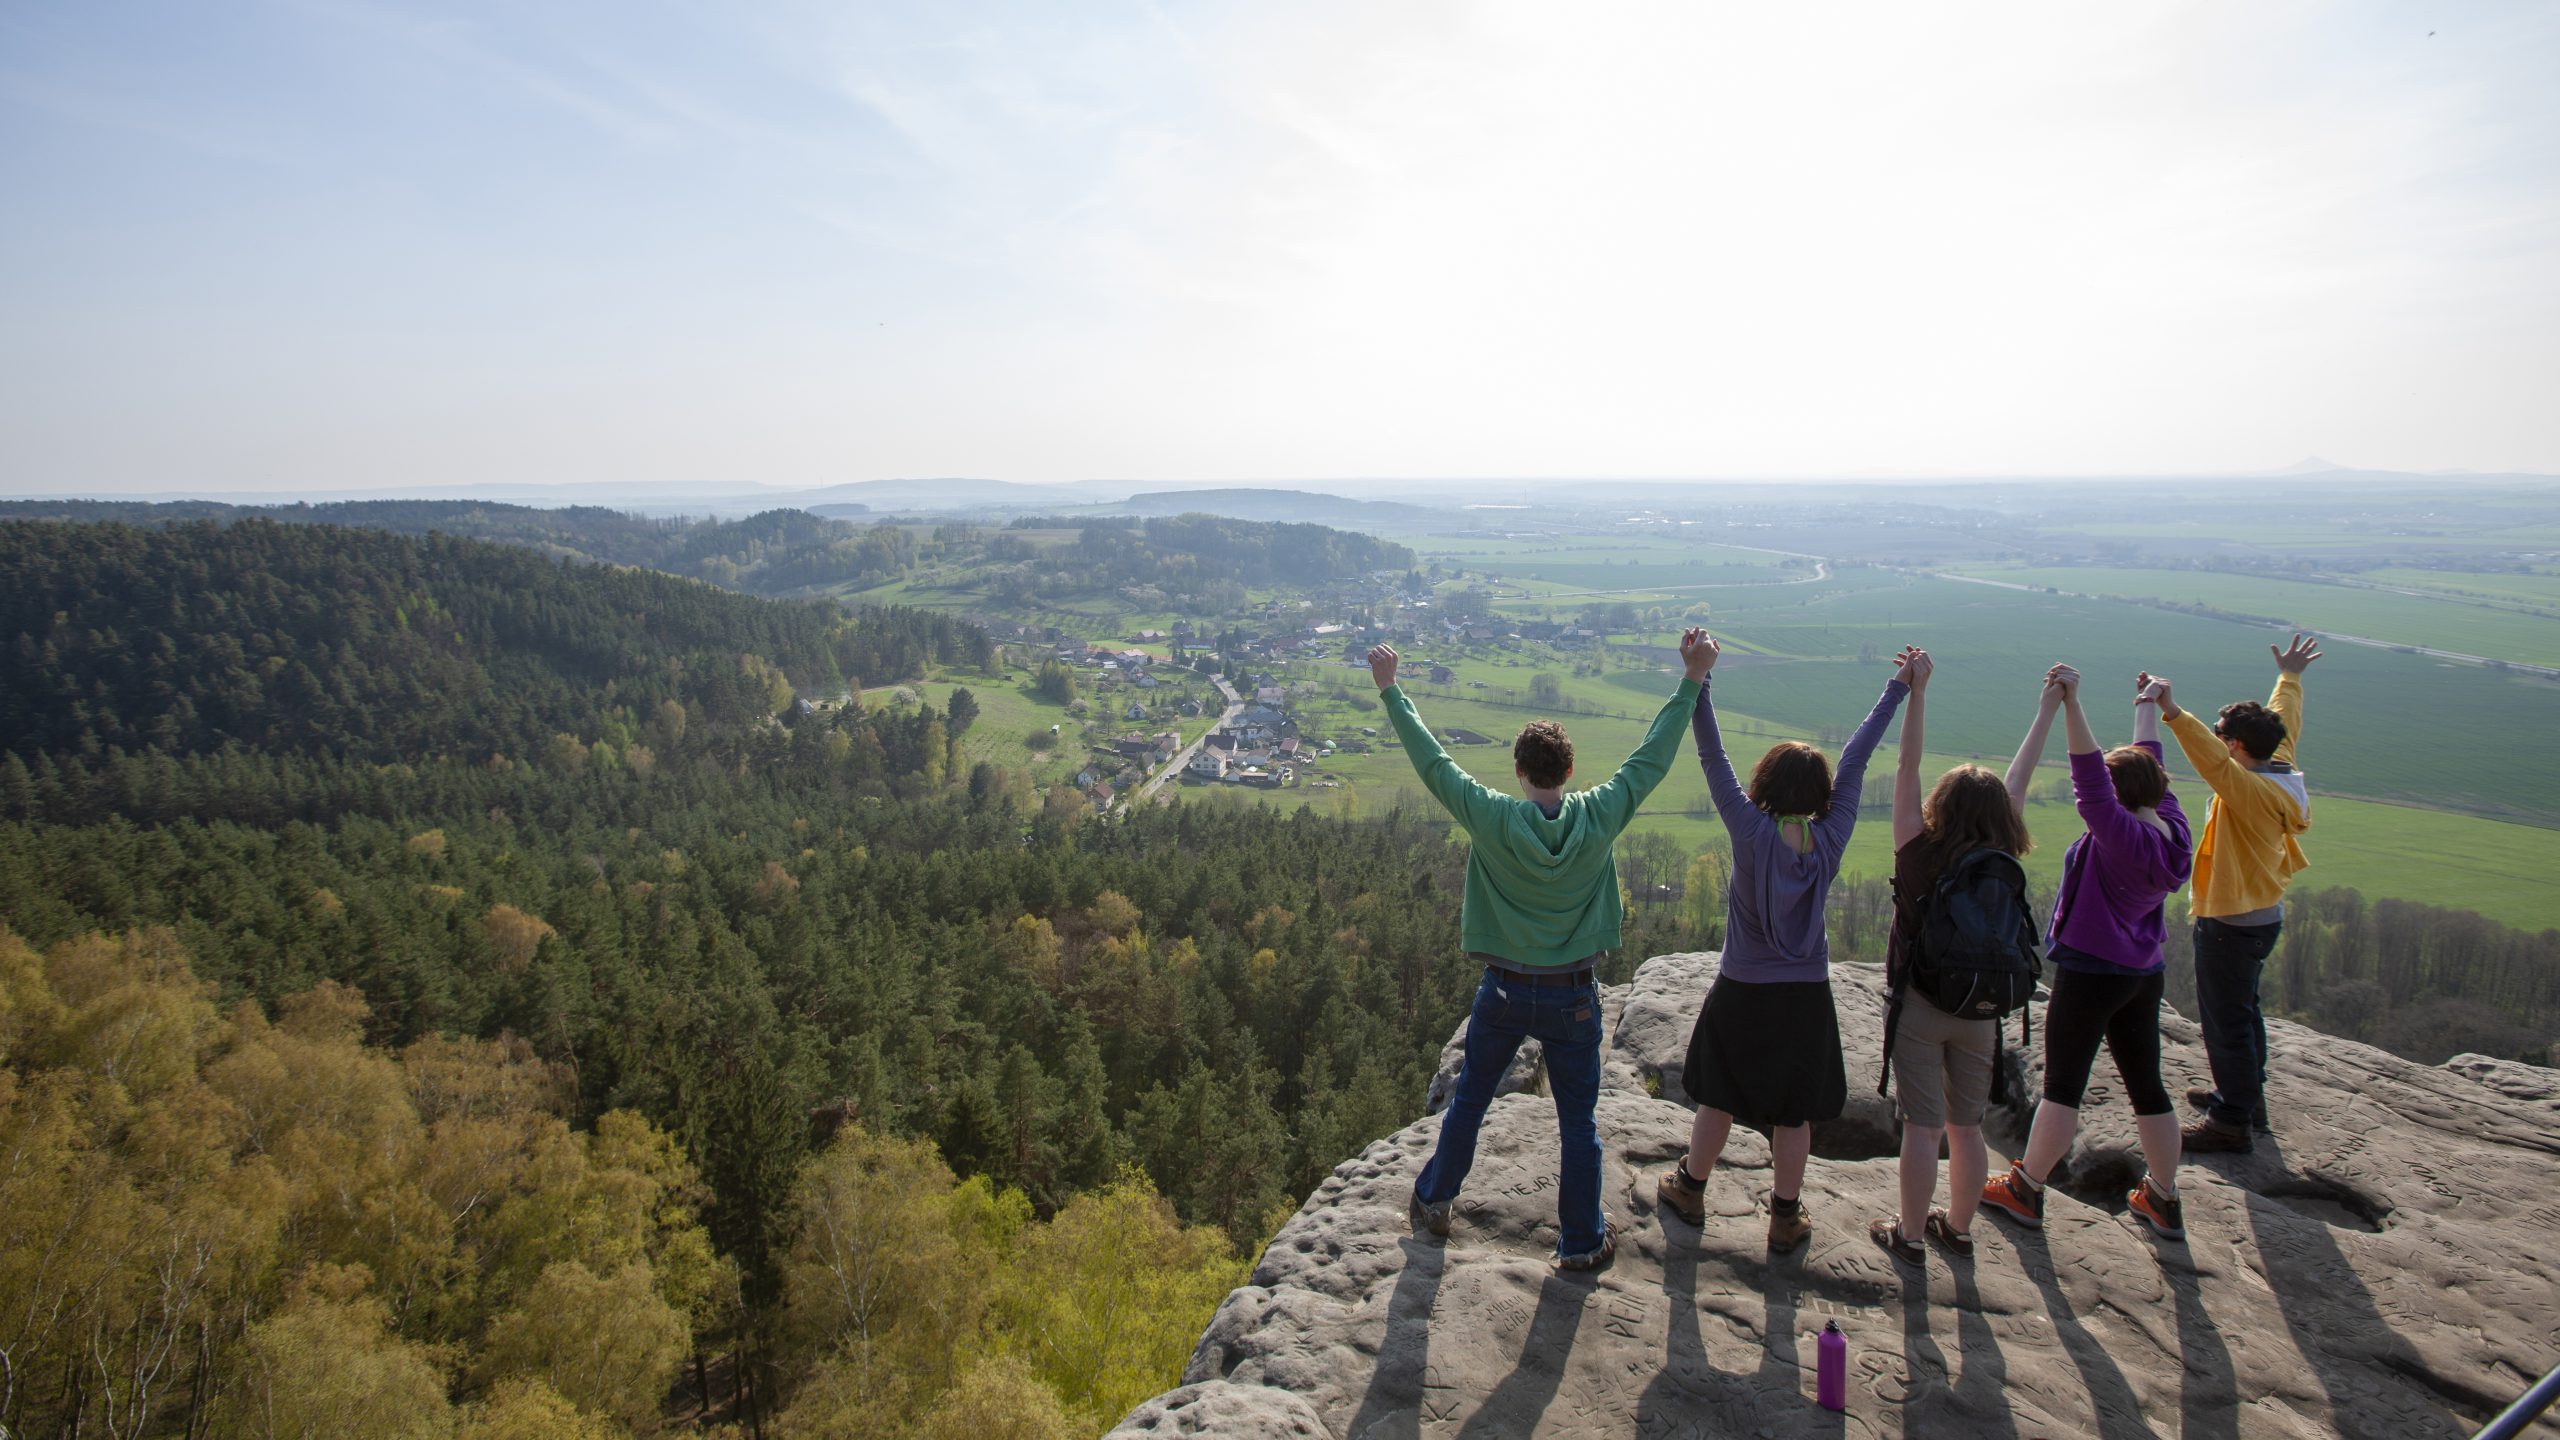 People holding raised hands at a teambuilding event on the top of a hill, with a view over the forest and fields. Photographer Tuomas Harjumaaskola.